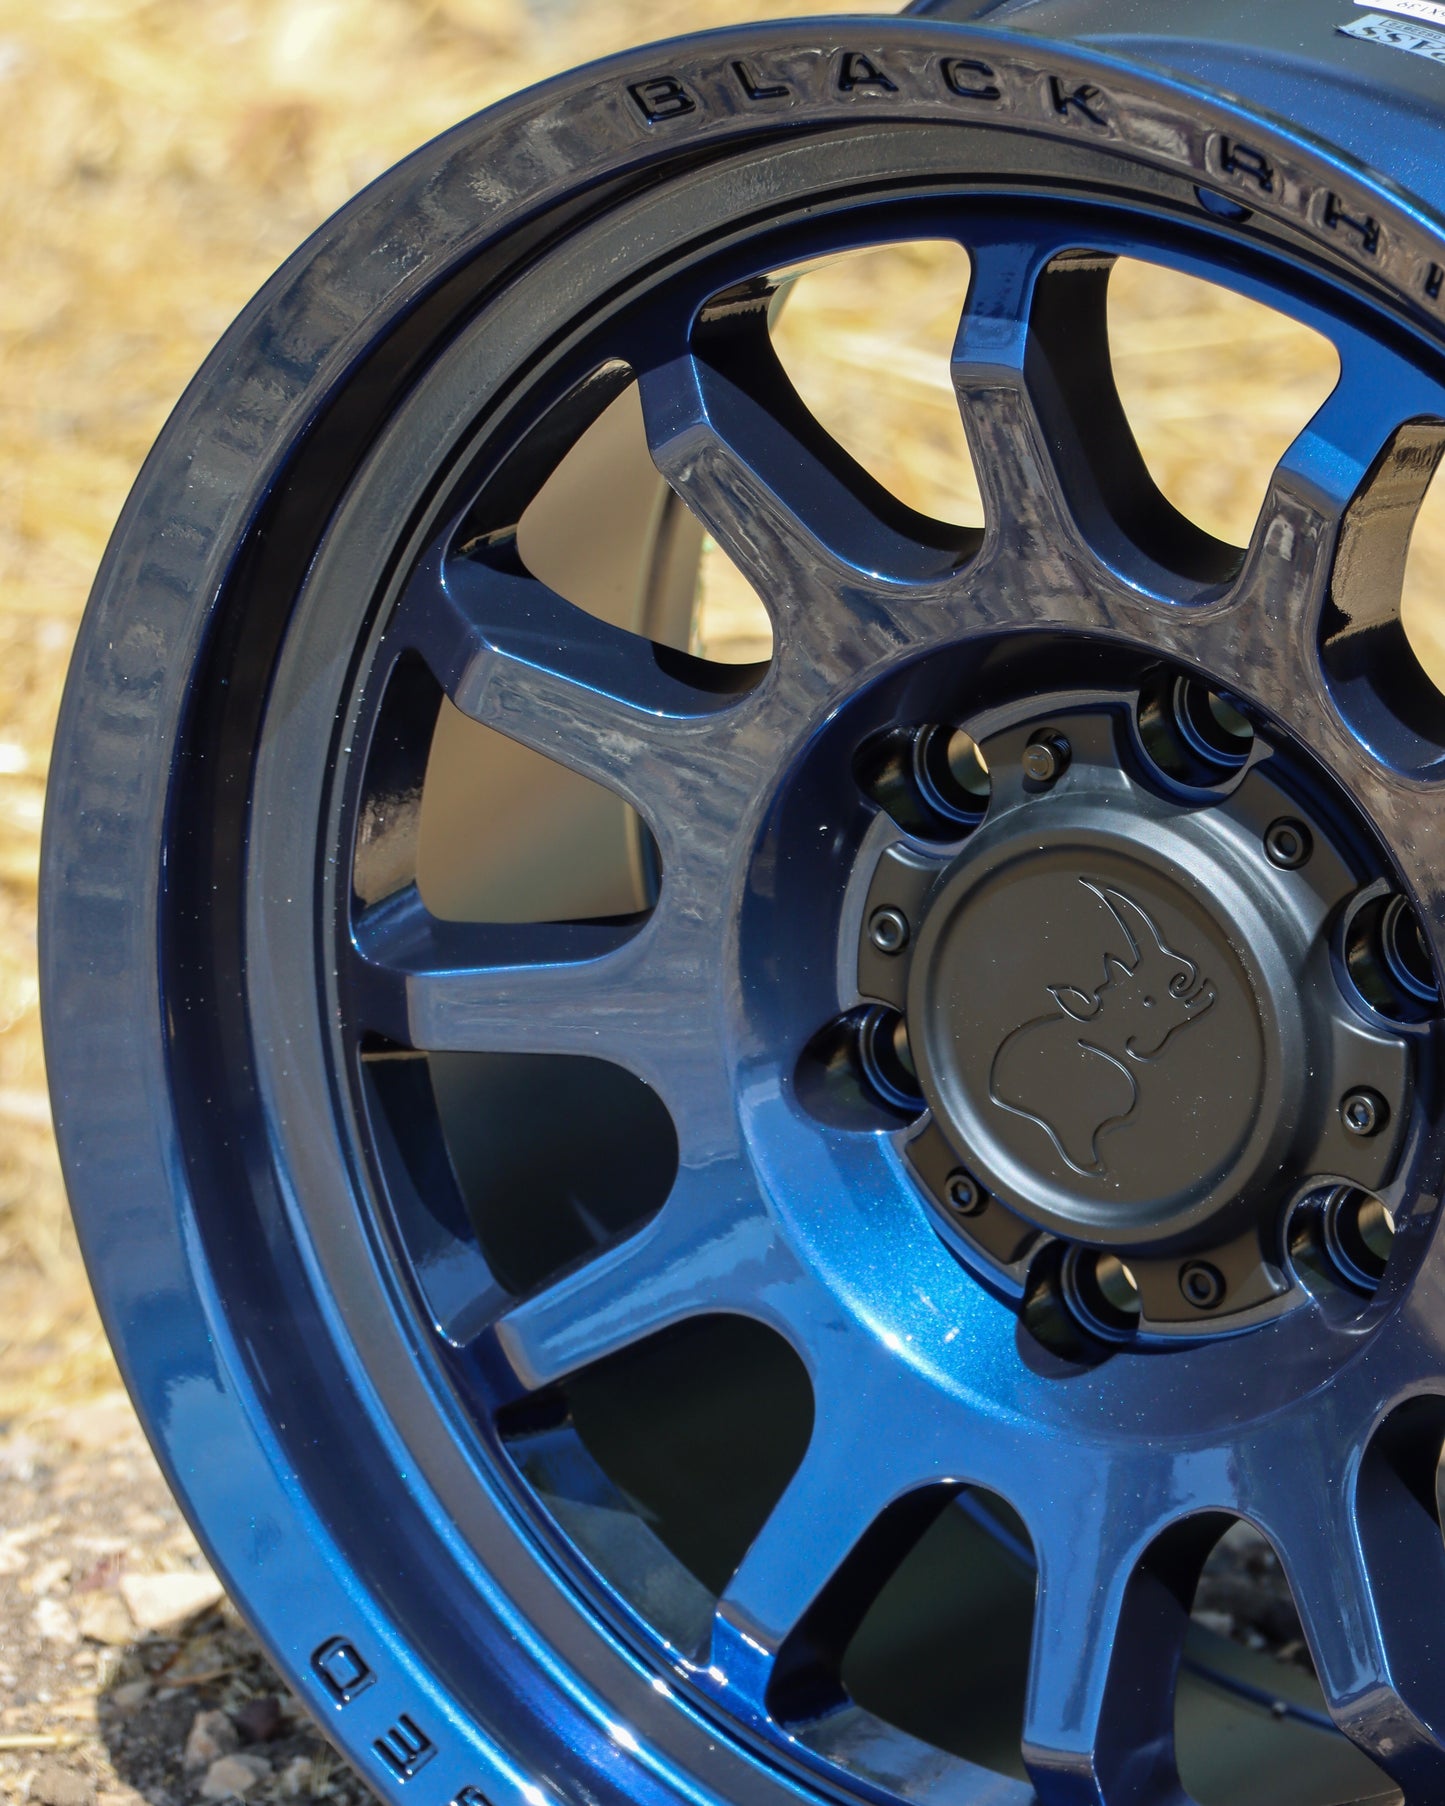 Close-up of the Black Rhino Rapid wheel with a Midnight Blue Finish.